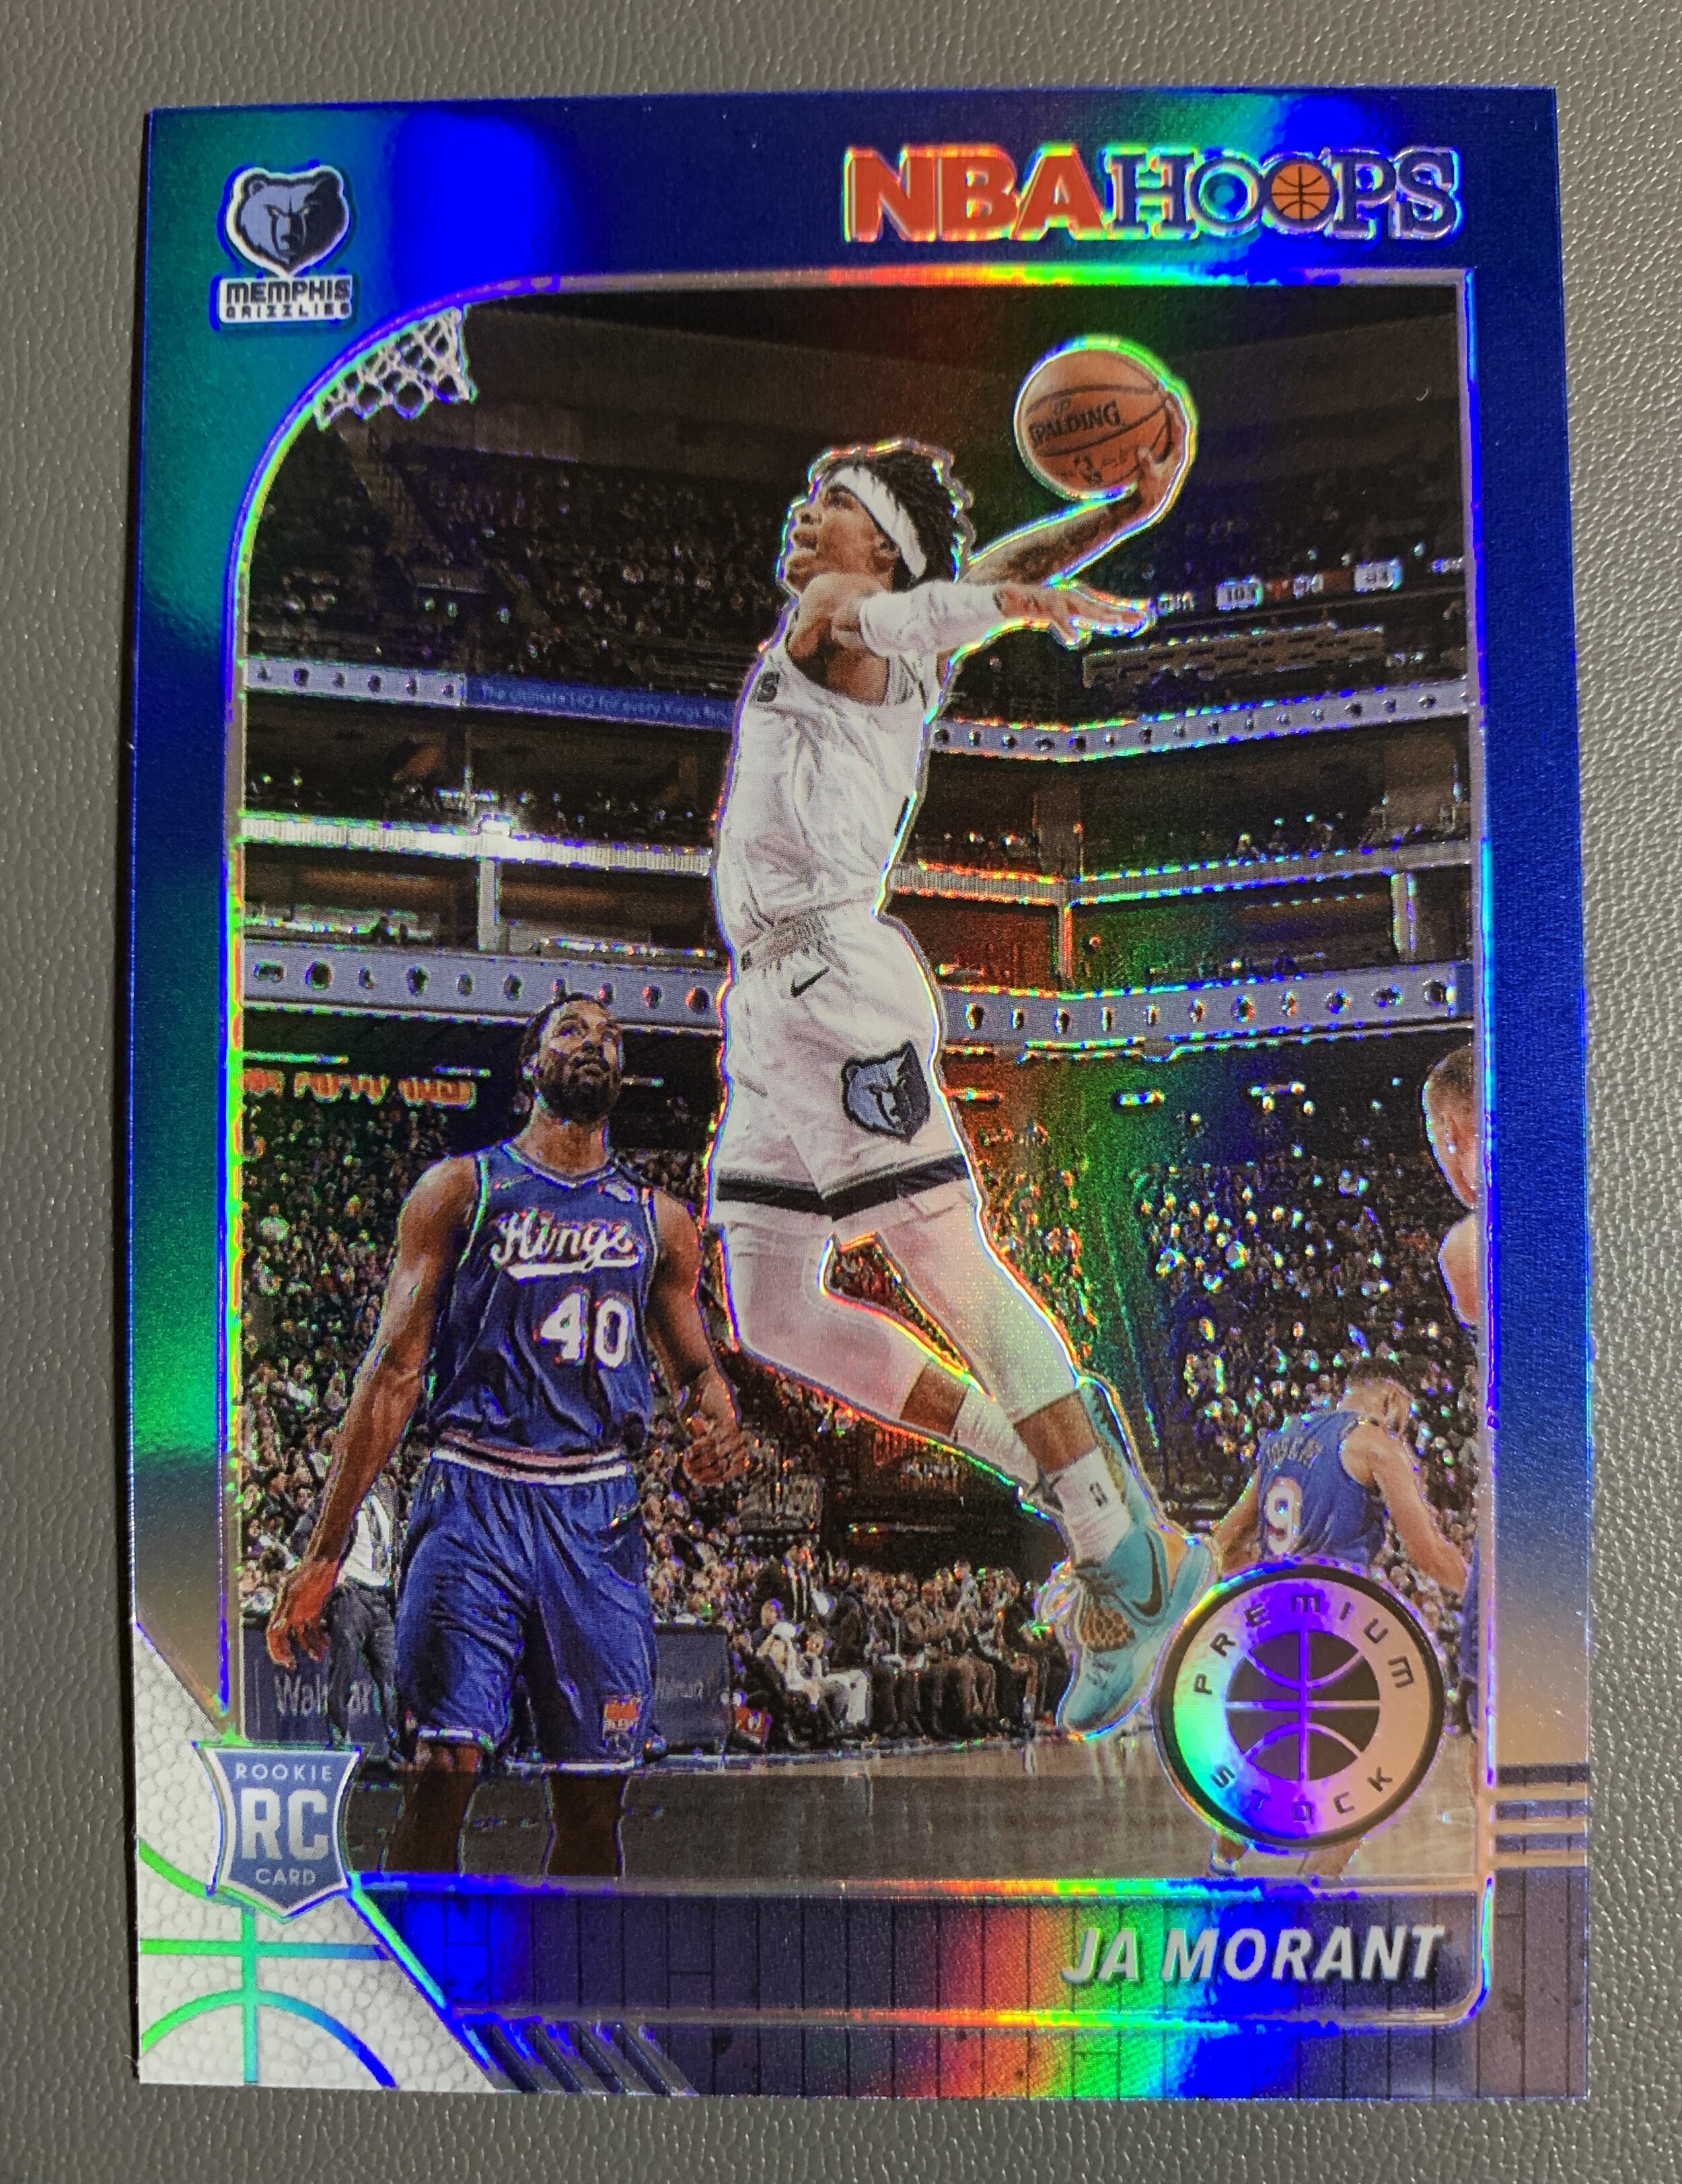 Superb looking card. Great Dunk. Cool shoes, Ja. Also, don’t miss Harrison Barnes in the most Harrison Barnes pose ever captured on a card